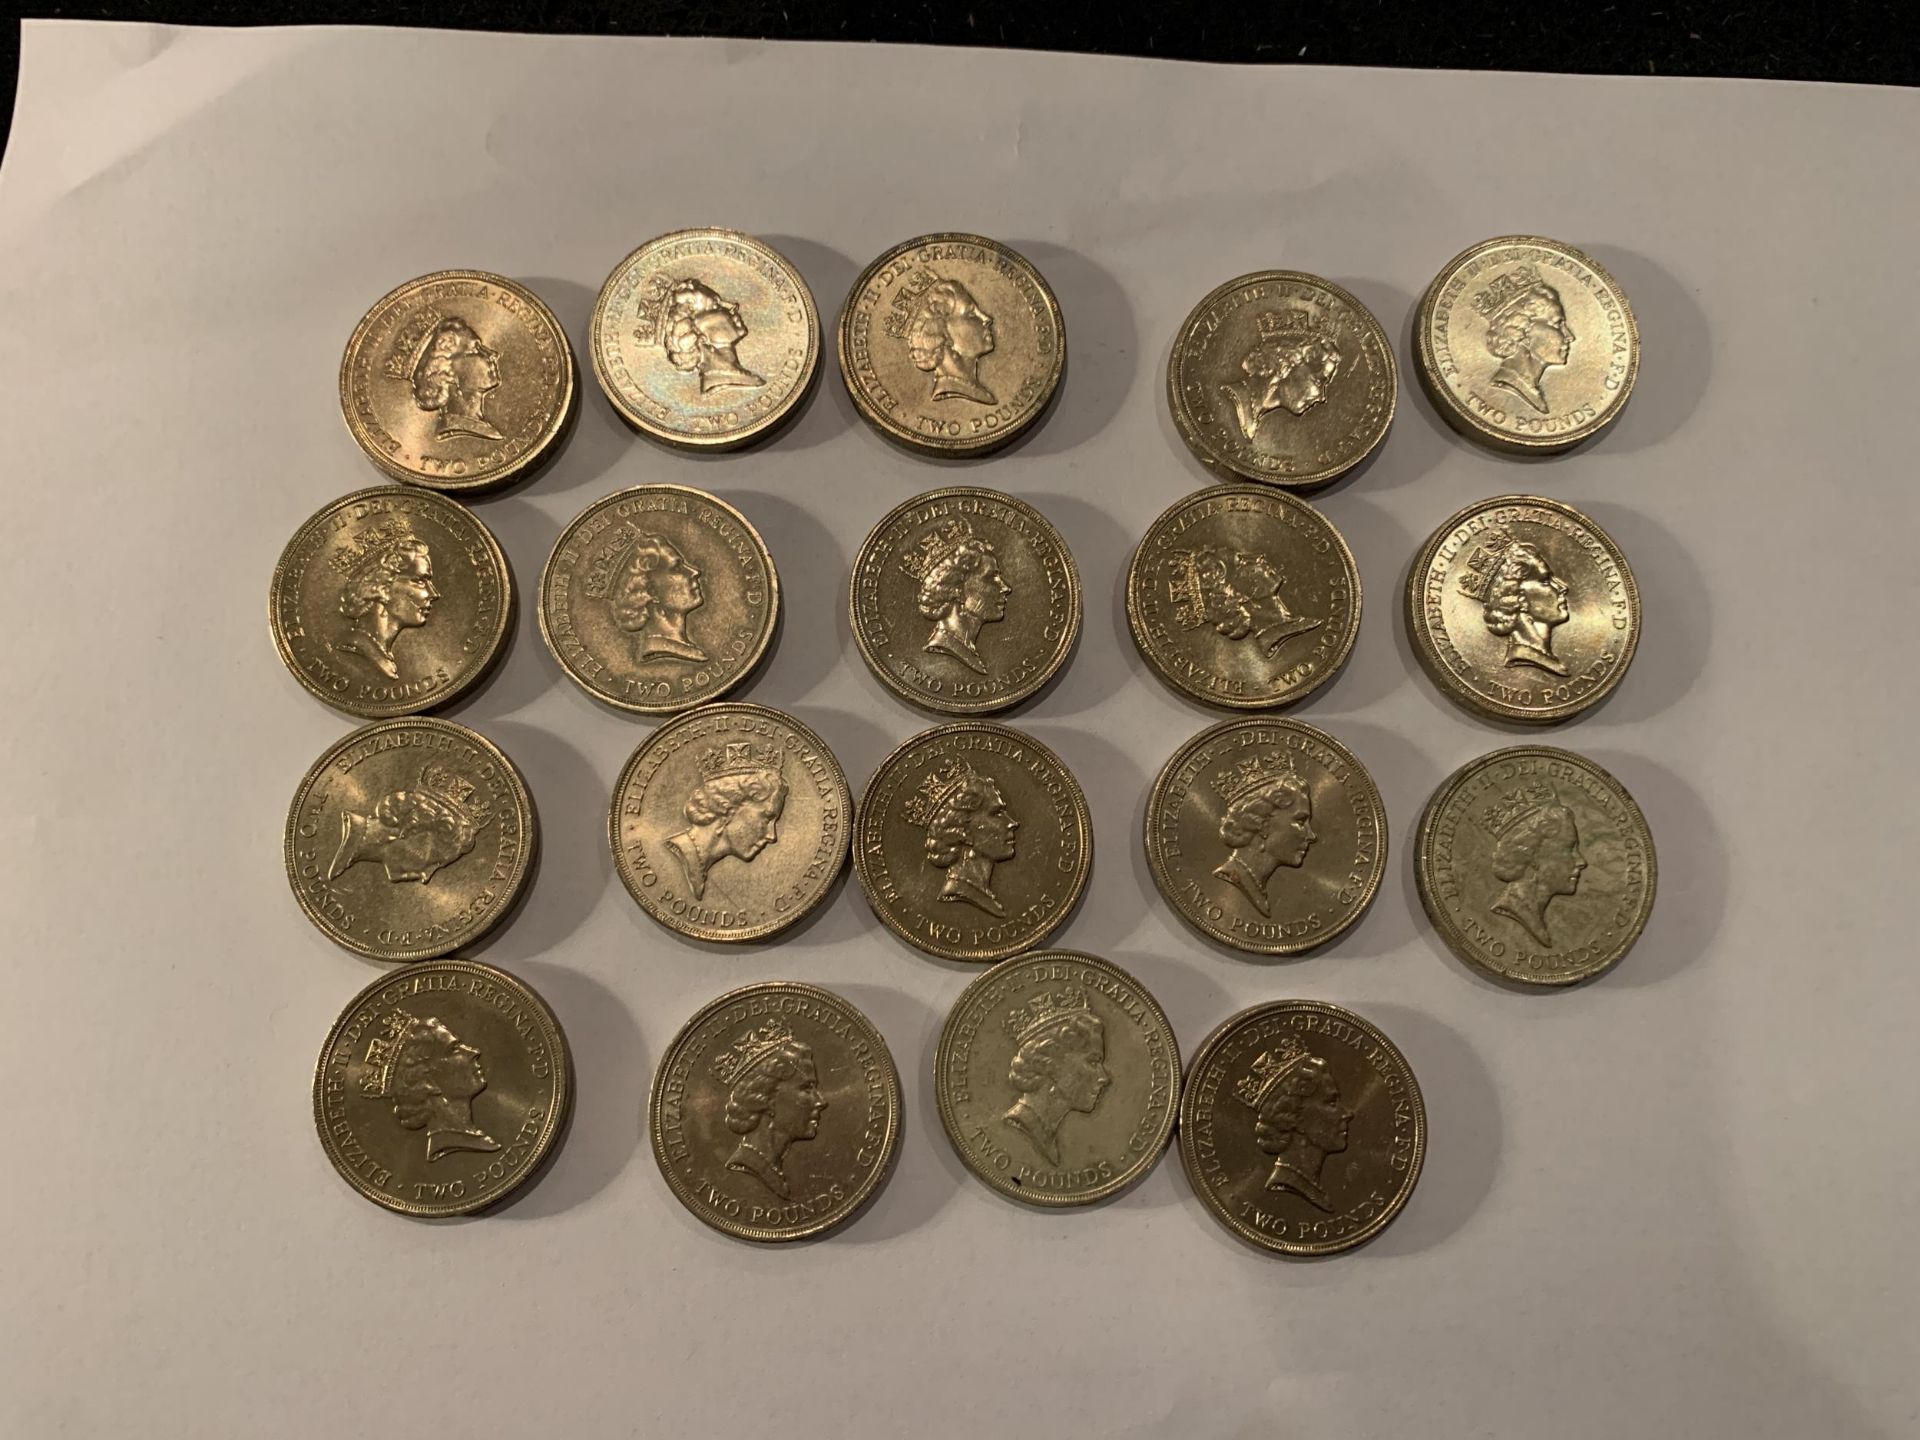 A SELECTION OF 19 UK £2 COINS , MAINLY UNCIRCULATED - Image 2 of 2